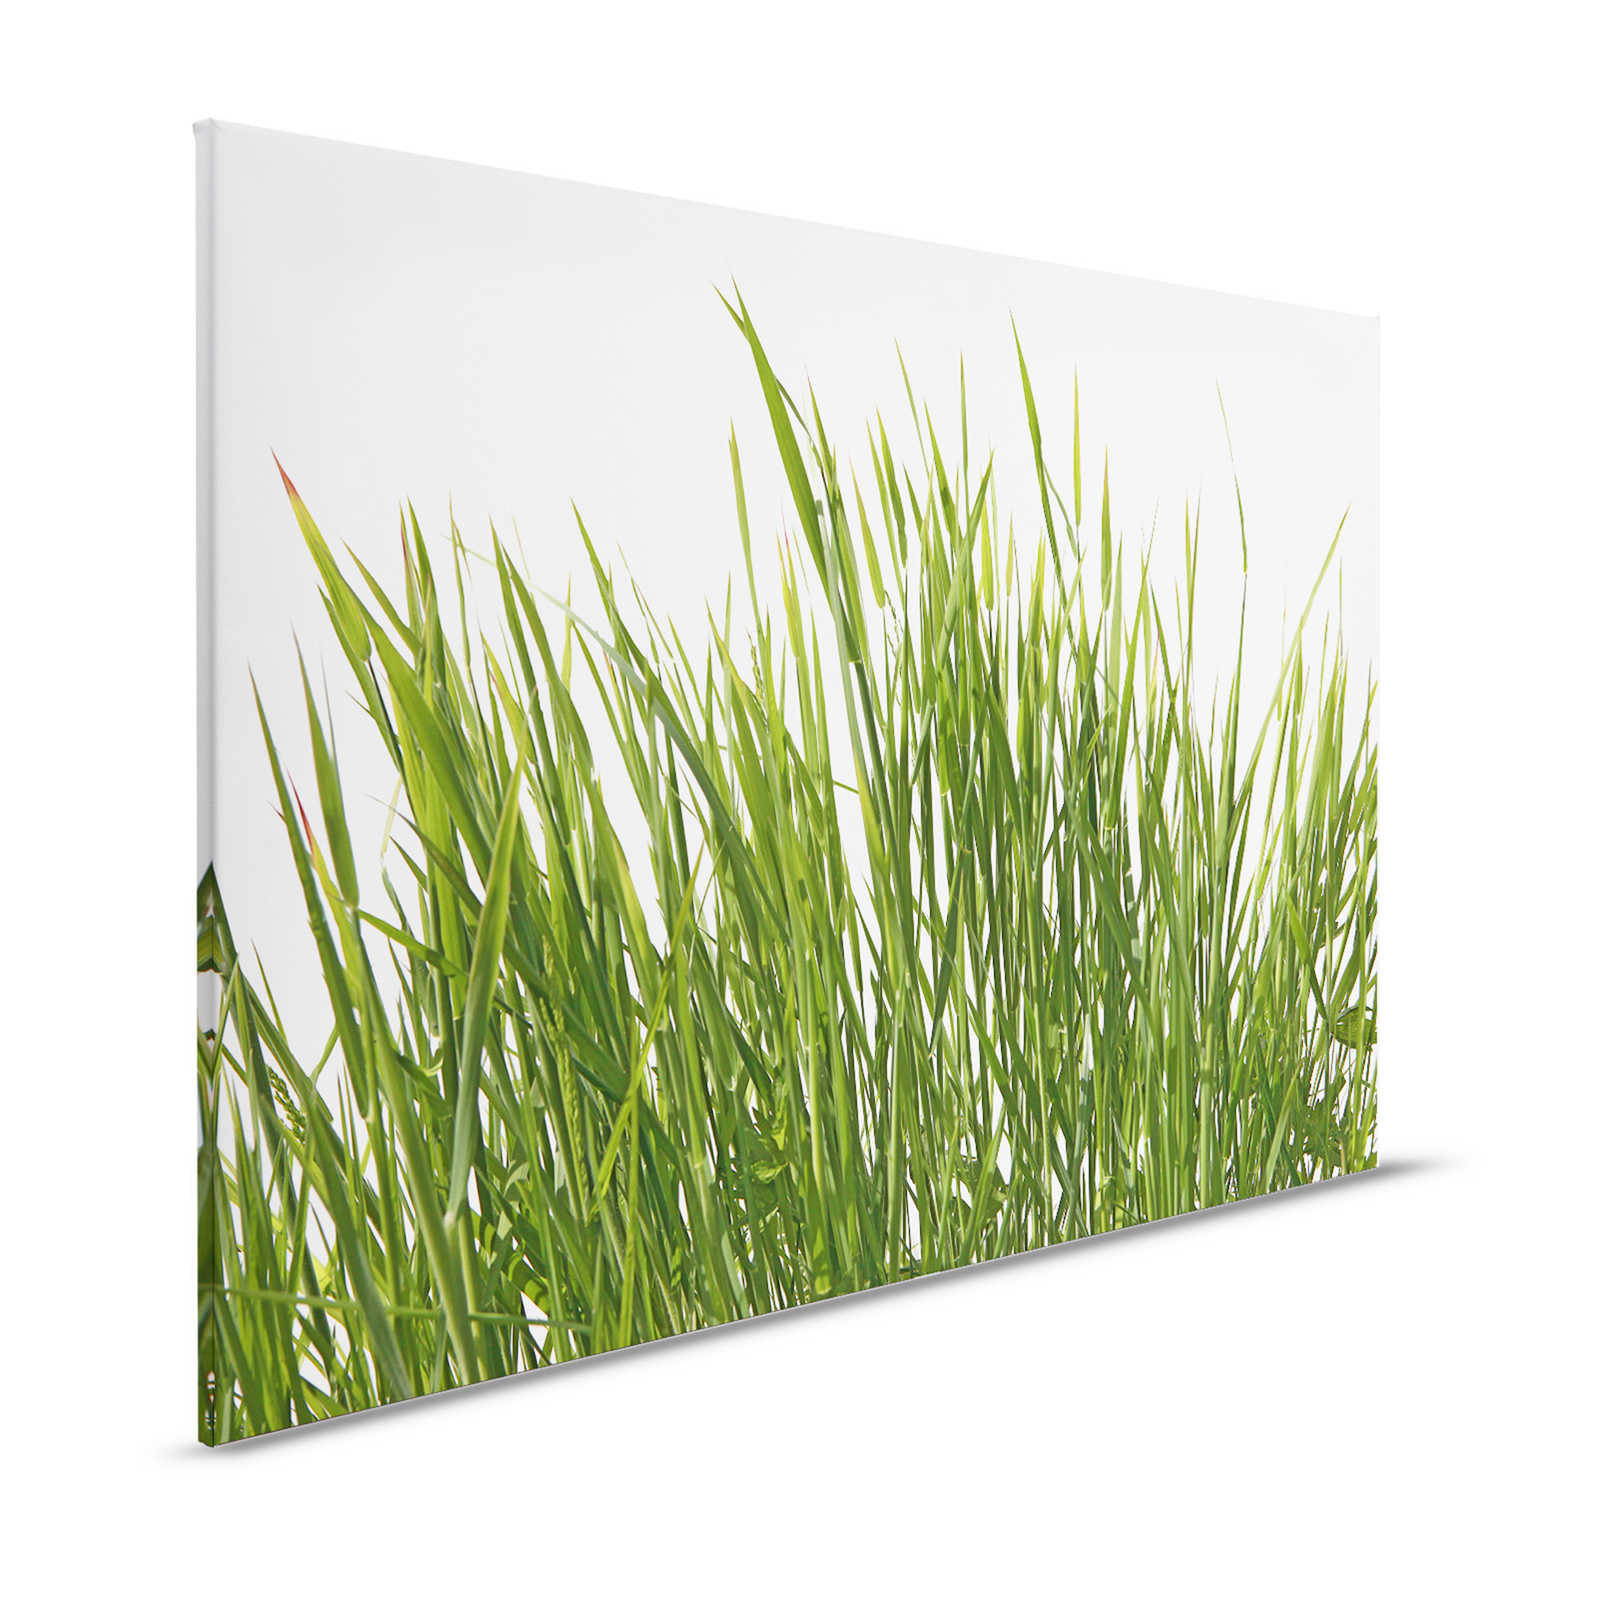 Canvas painting Grasses detail with white background - 1,20 m x 0,80 m
